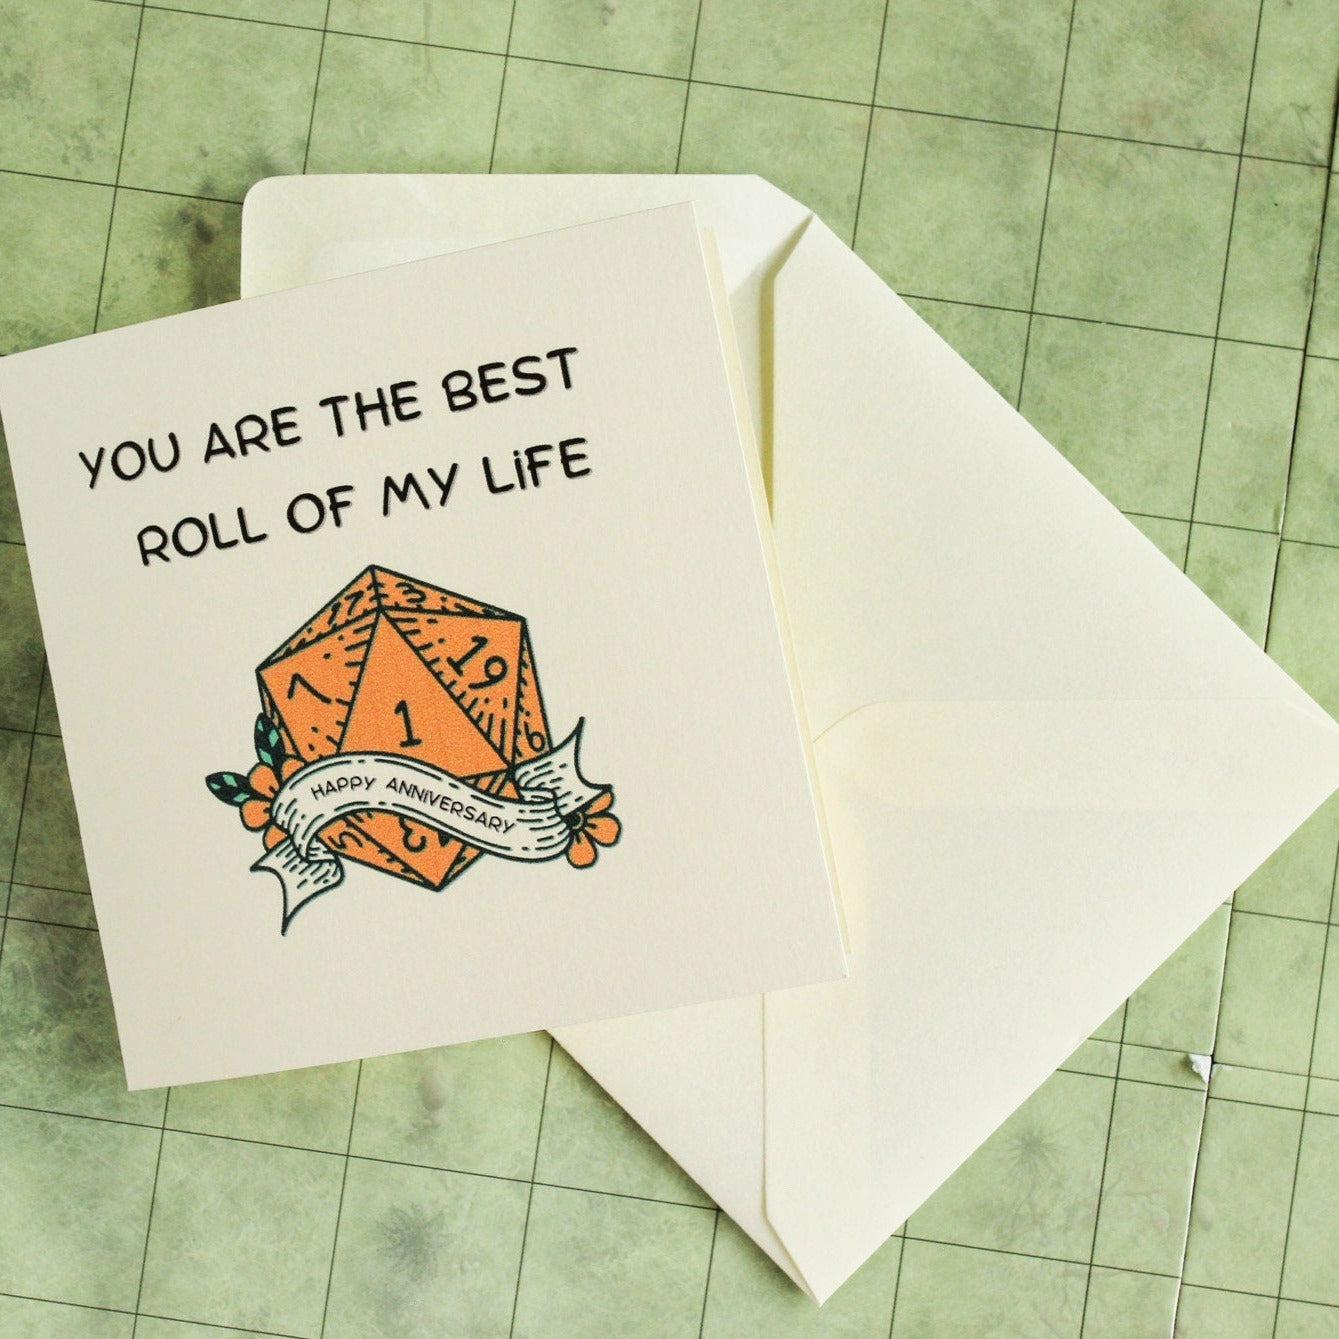 DnD You Are The Best Roll of My Life Romance Love Card | Dungeons and Dragons Card | DnD Card | DnD Present | DnD Love | DnD Gift